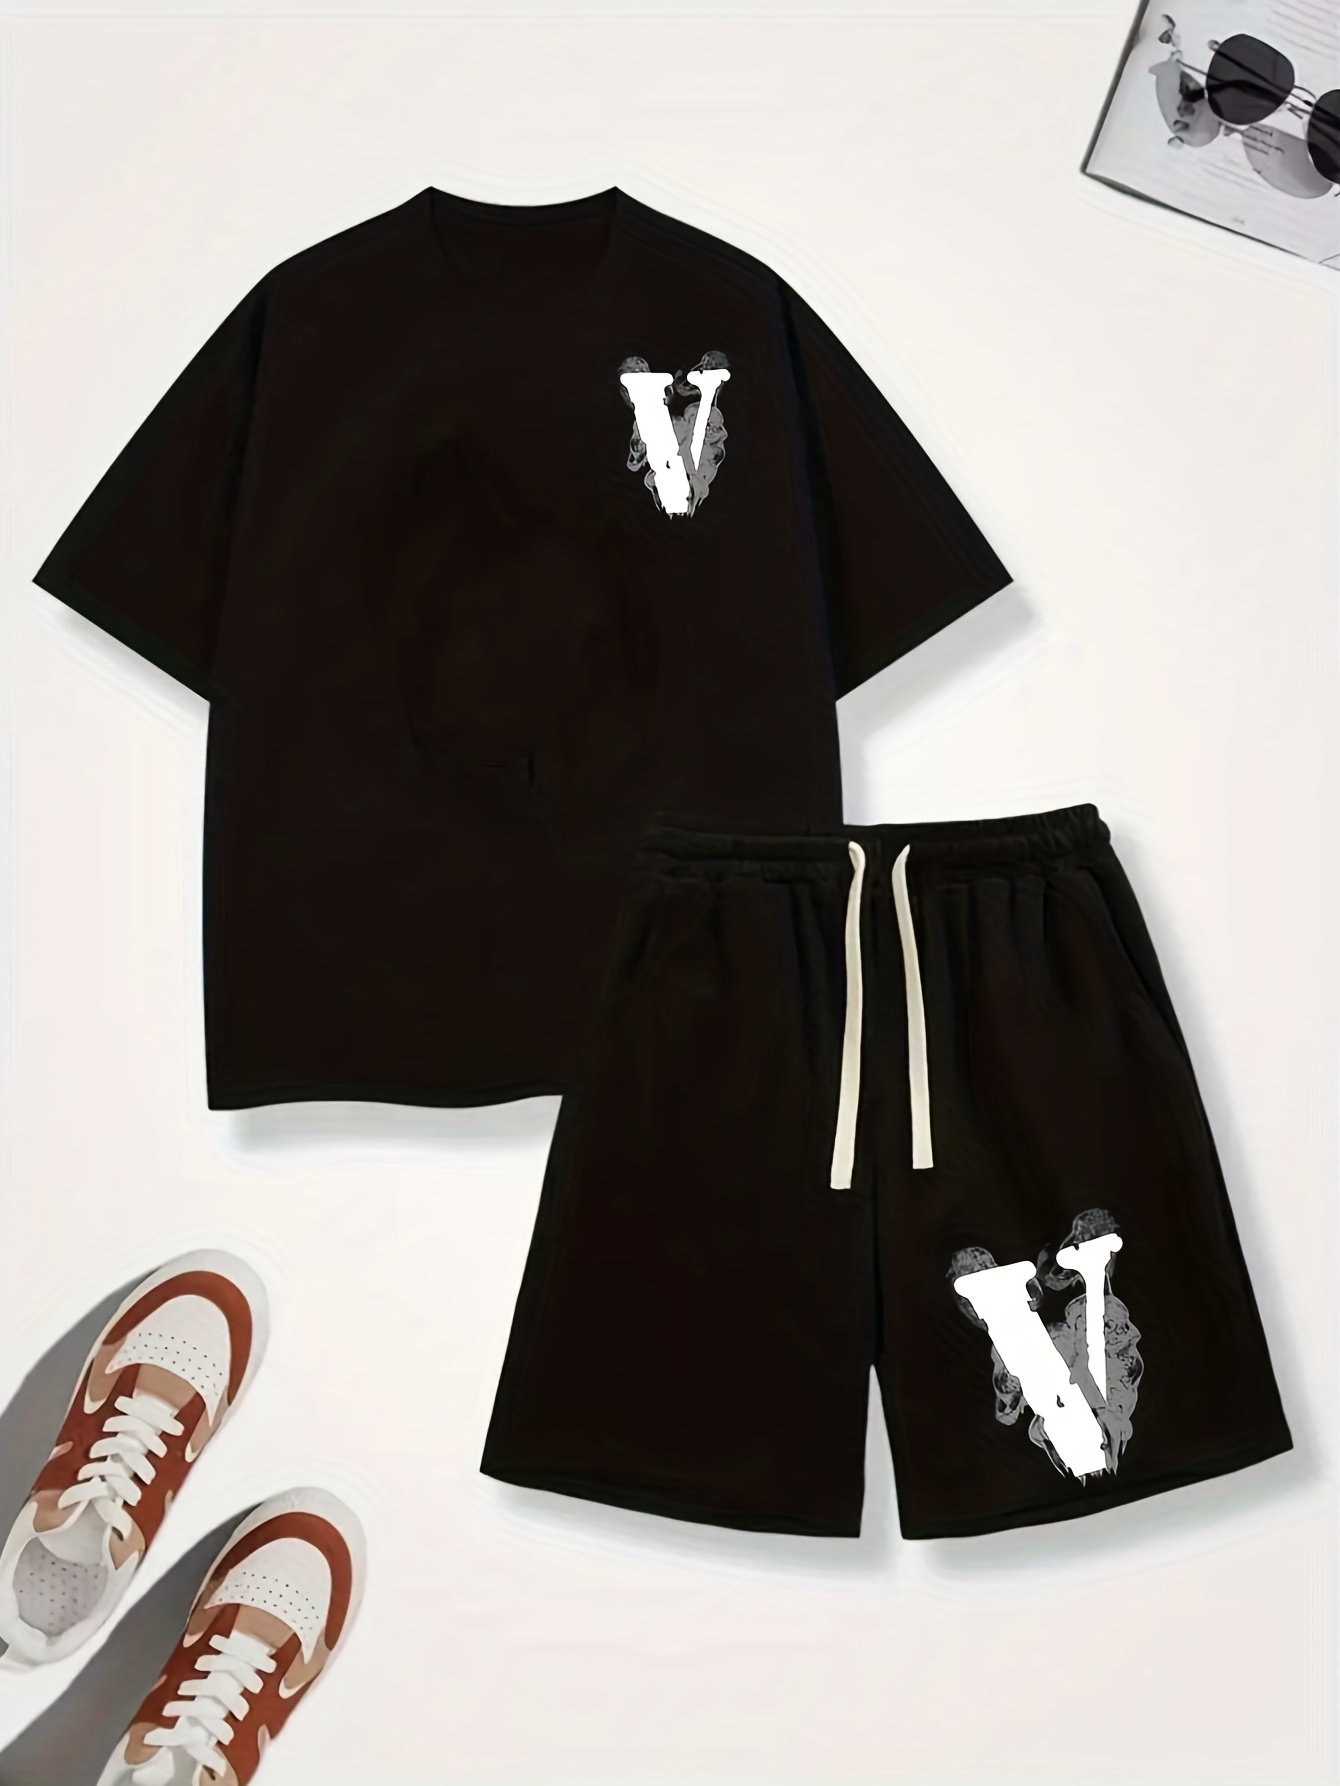 Men :: Clothing :: T-shirts :: Louis Vuitton Graphic Short-Sleeved